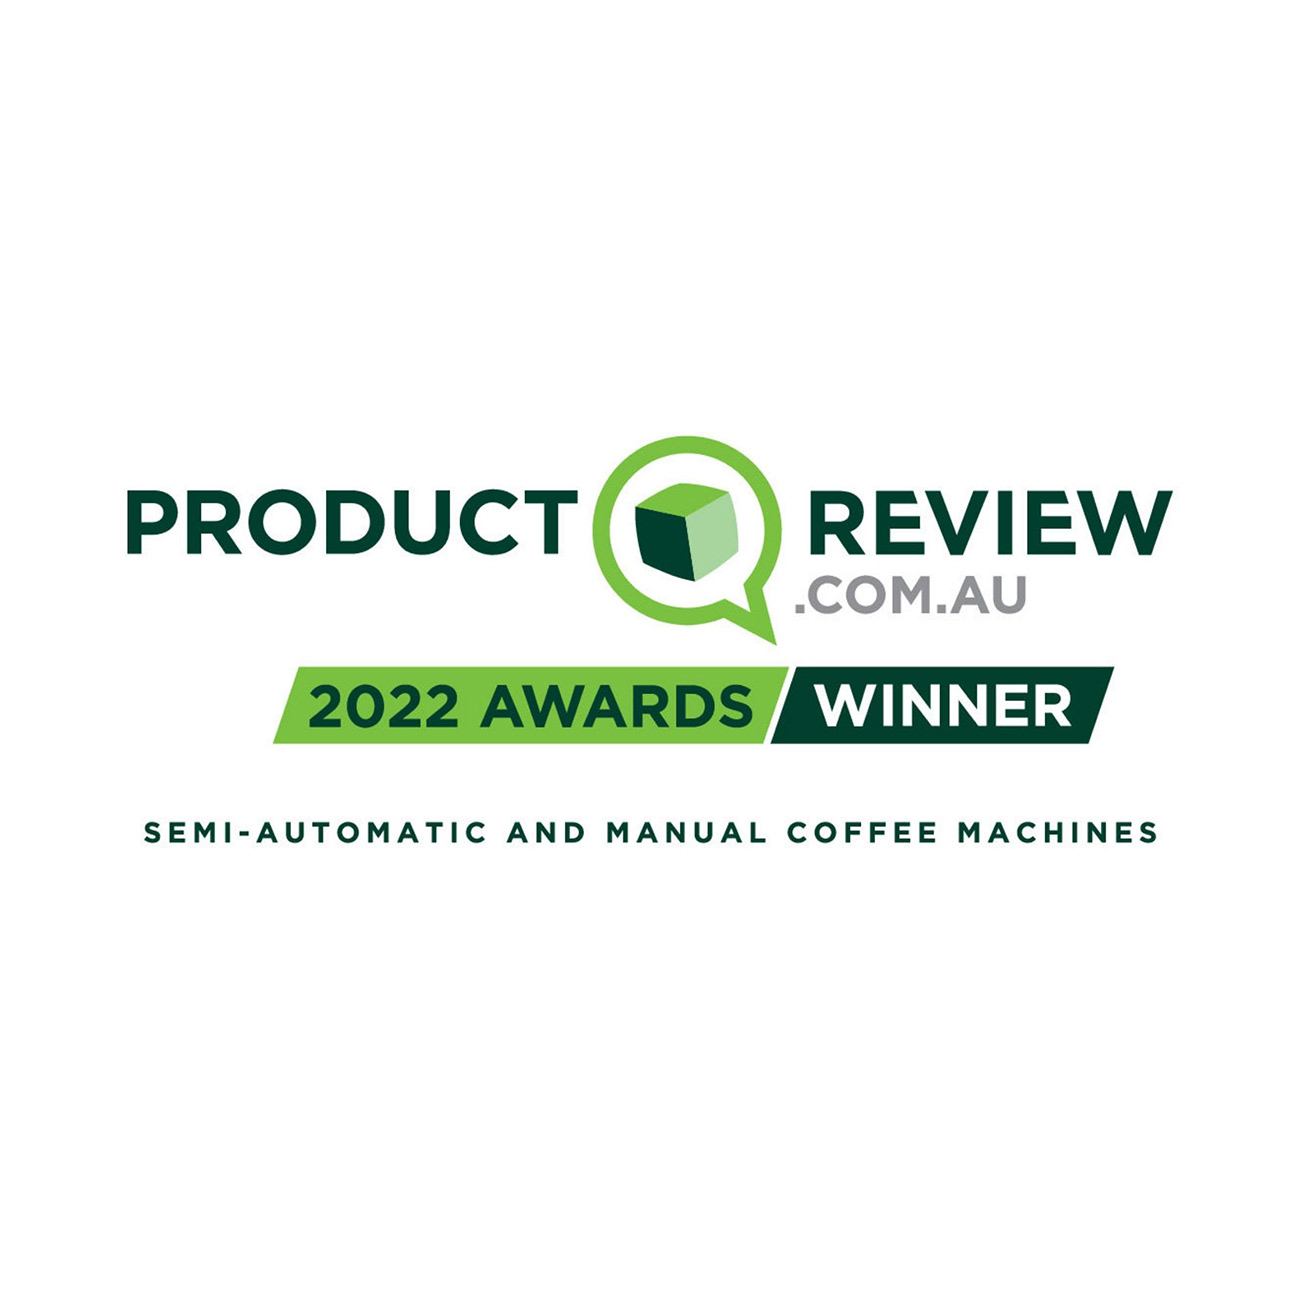  Product Review 2022 Awards Winner